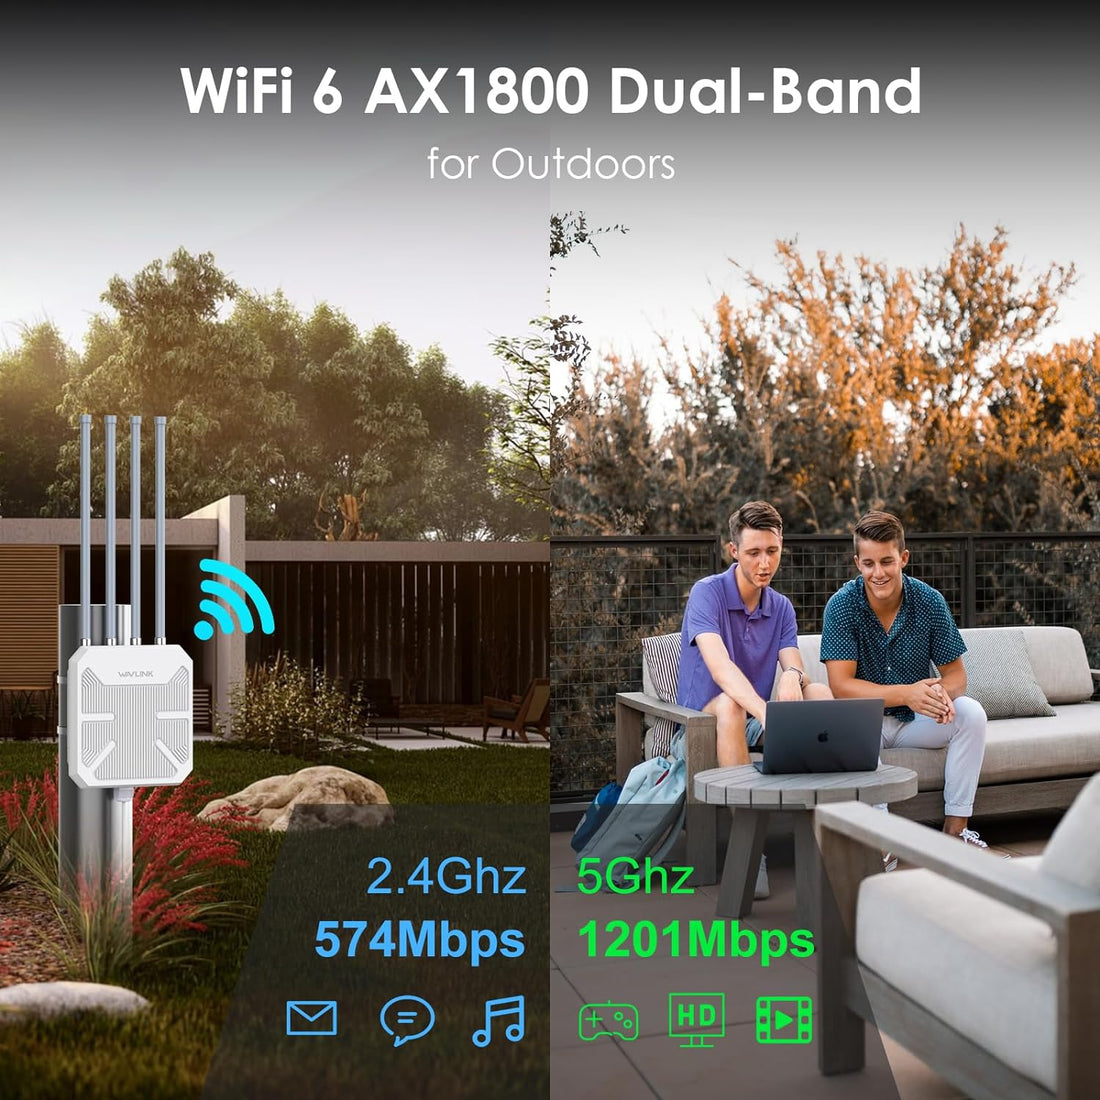 Outdoor WiFi 6 Access Point AX1800, WAVLINK Dual Band Business WiFi Range Extender Weatherproof, Active/Passive POE Powered, AP/Repeater/Mesh Router Mode, Up to 128 Devices, Detachable Antennas